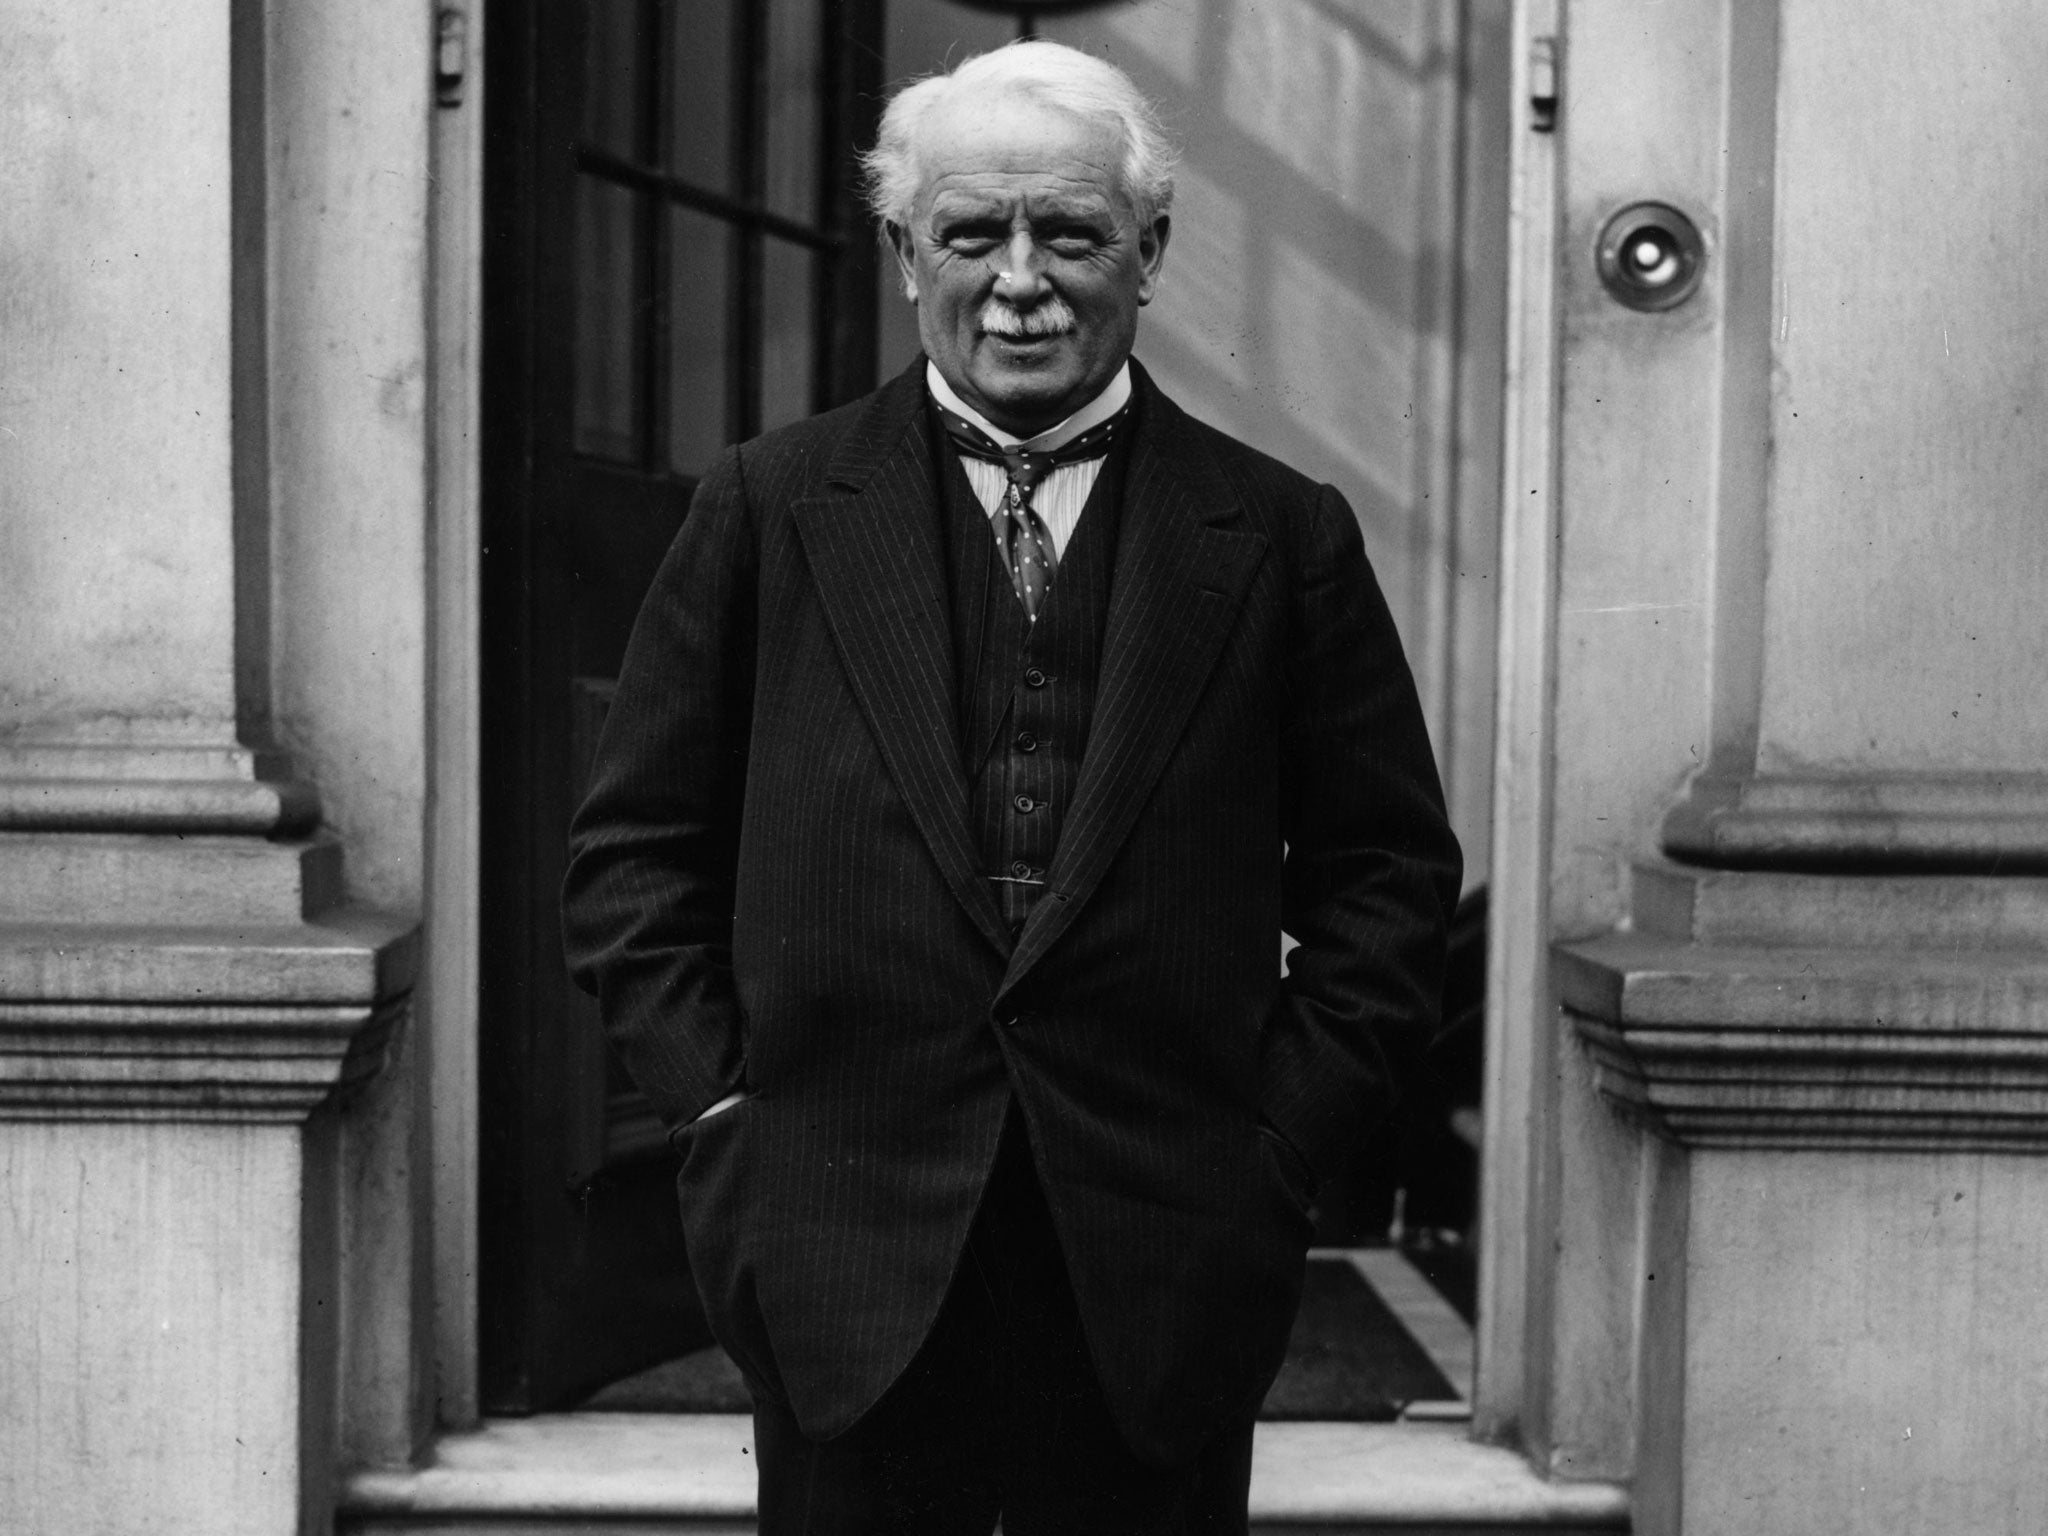 David Lloyd George, photographed in 1929, held powerful positions in government and politics for 25 years and exhibited symptoms of HS